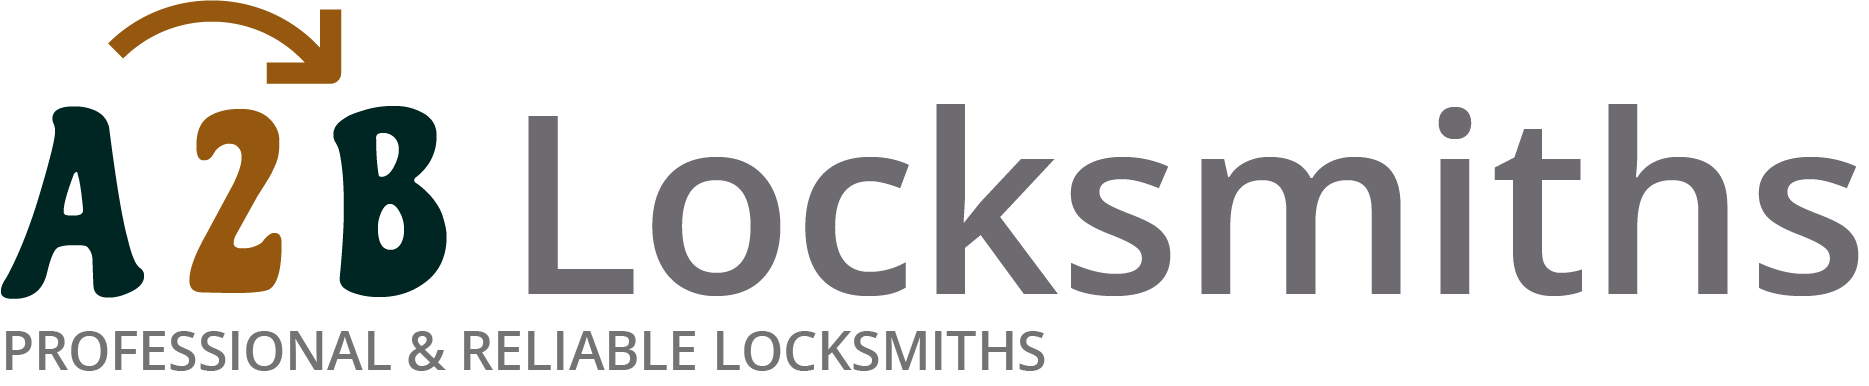 If you are locked out of house in North Shields, our 24/7 local emergency locksmith services can help you.